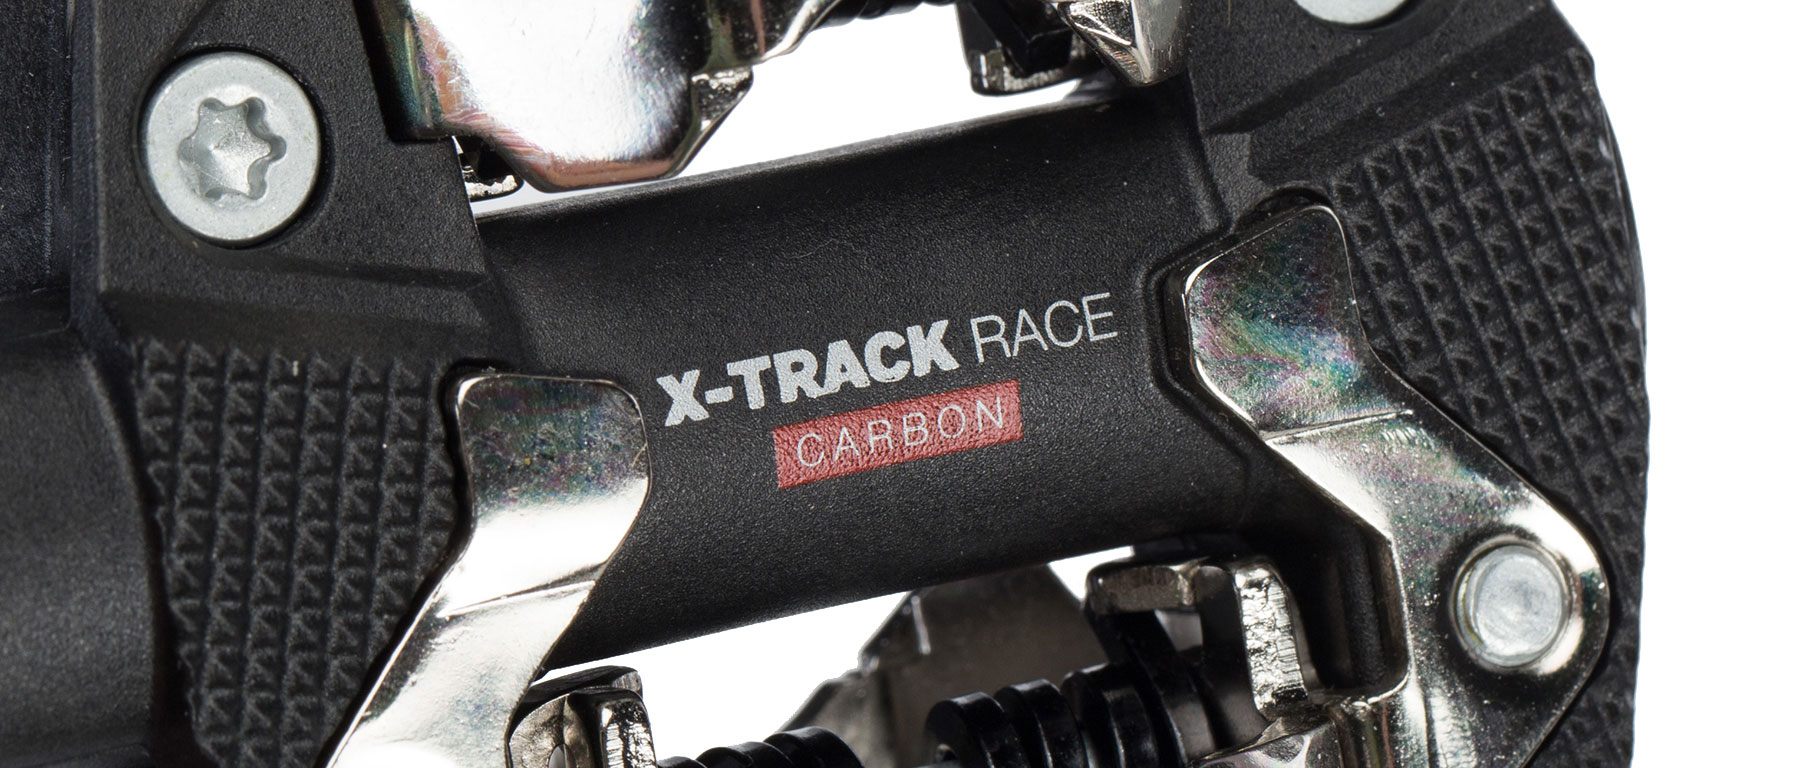 LOOK X-Track Race Carbon MTB Pedals